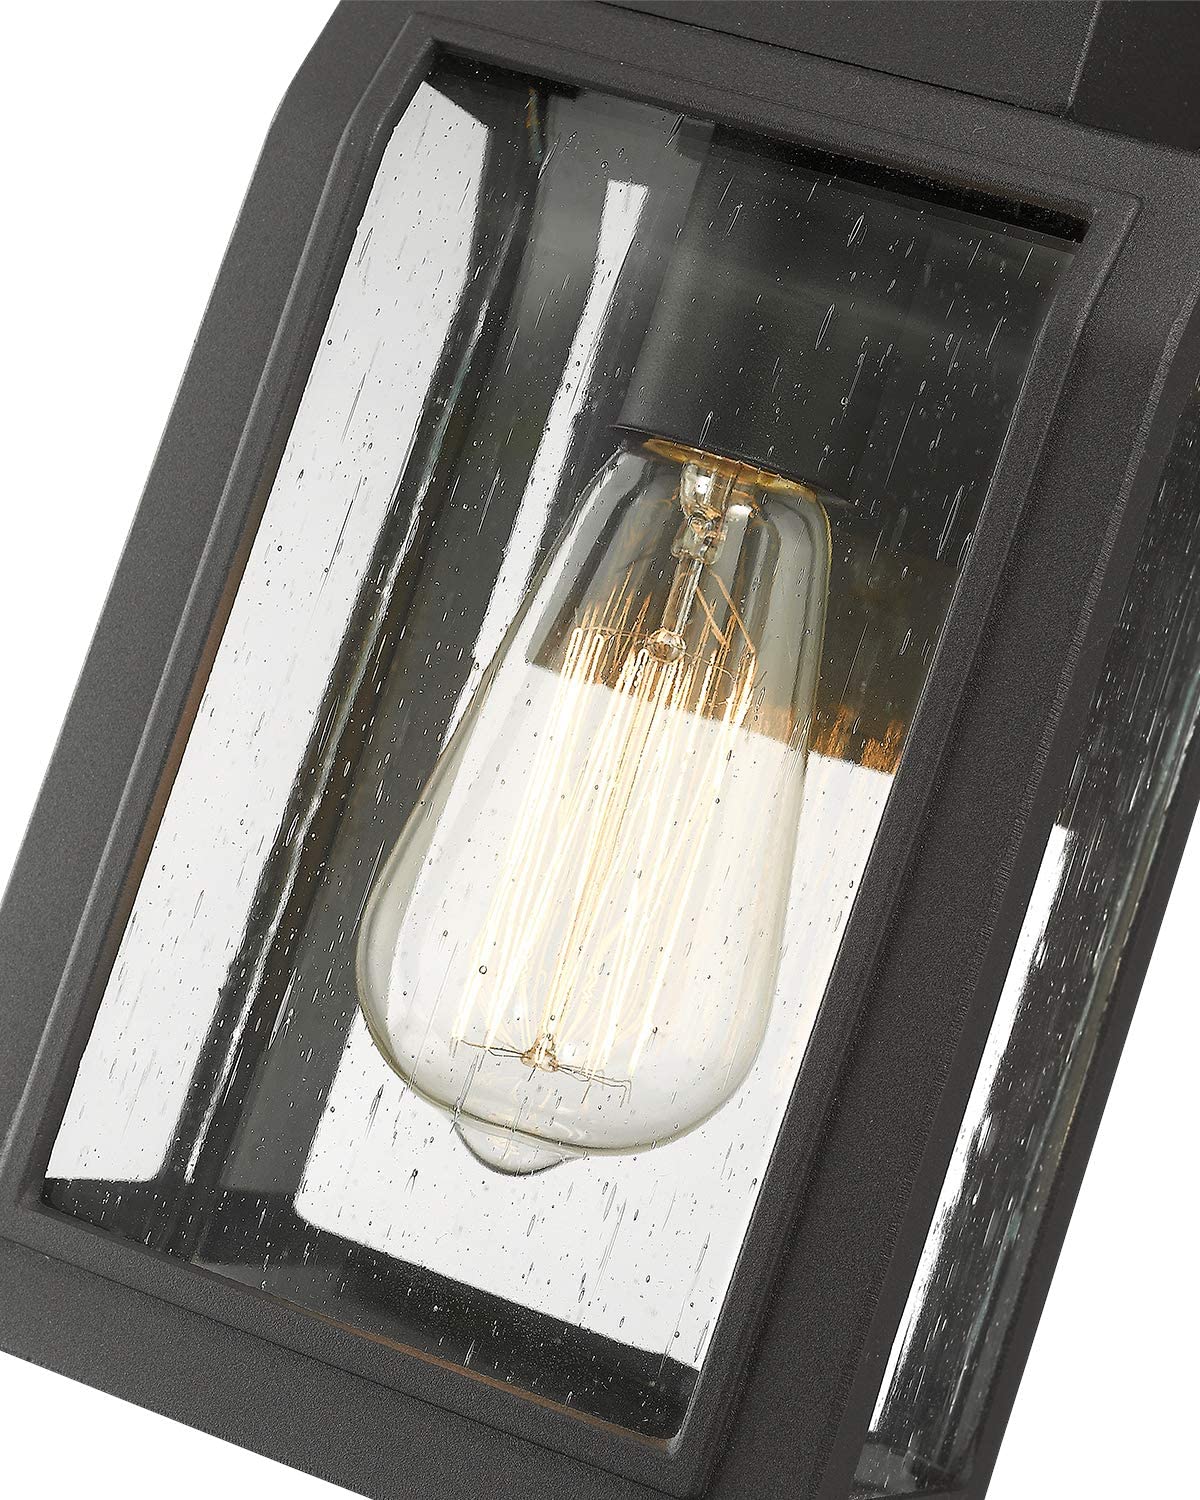 Black porch lights outdoor with seeded glass industrial exterior wall lighting fixture